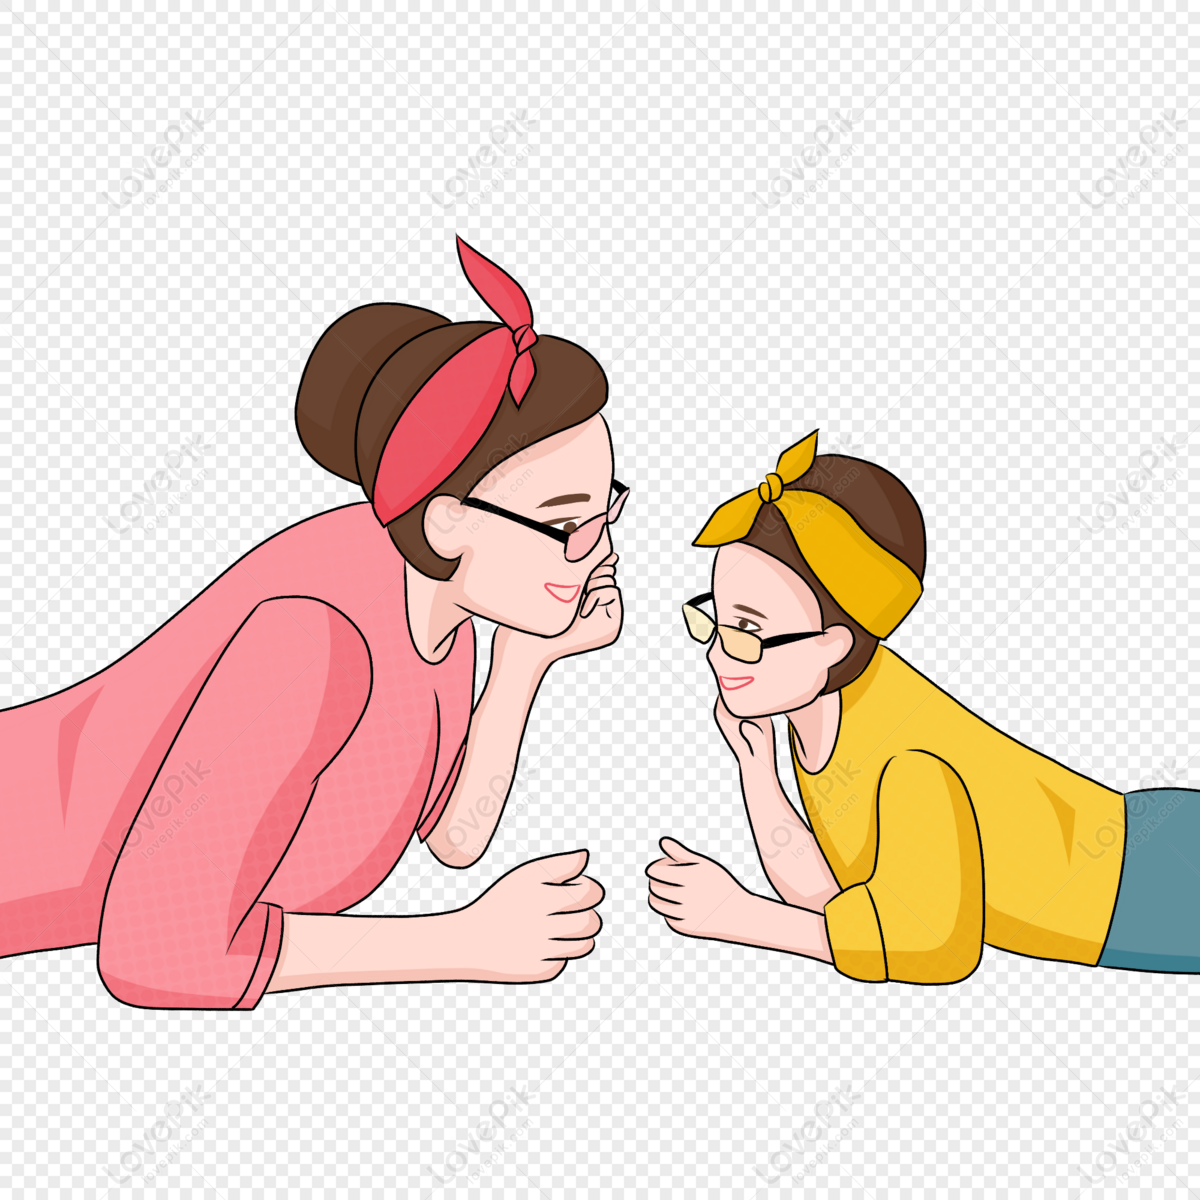 Cartoon Style Mother And Daughter Prone To Talk Characters PNG Hd  Transparent Image And Clipart Image For Free Download - Lovepik | 401021504